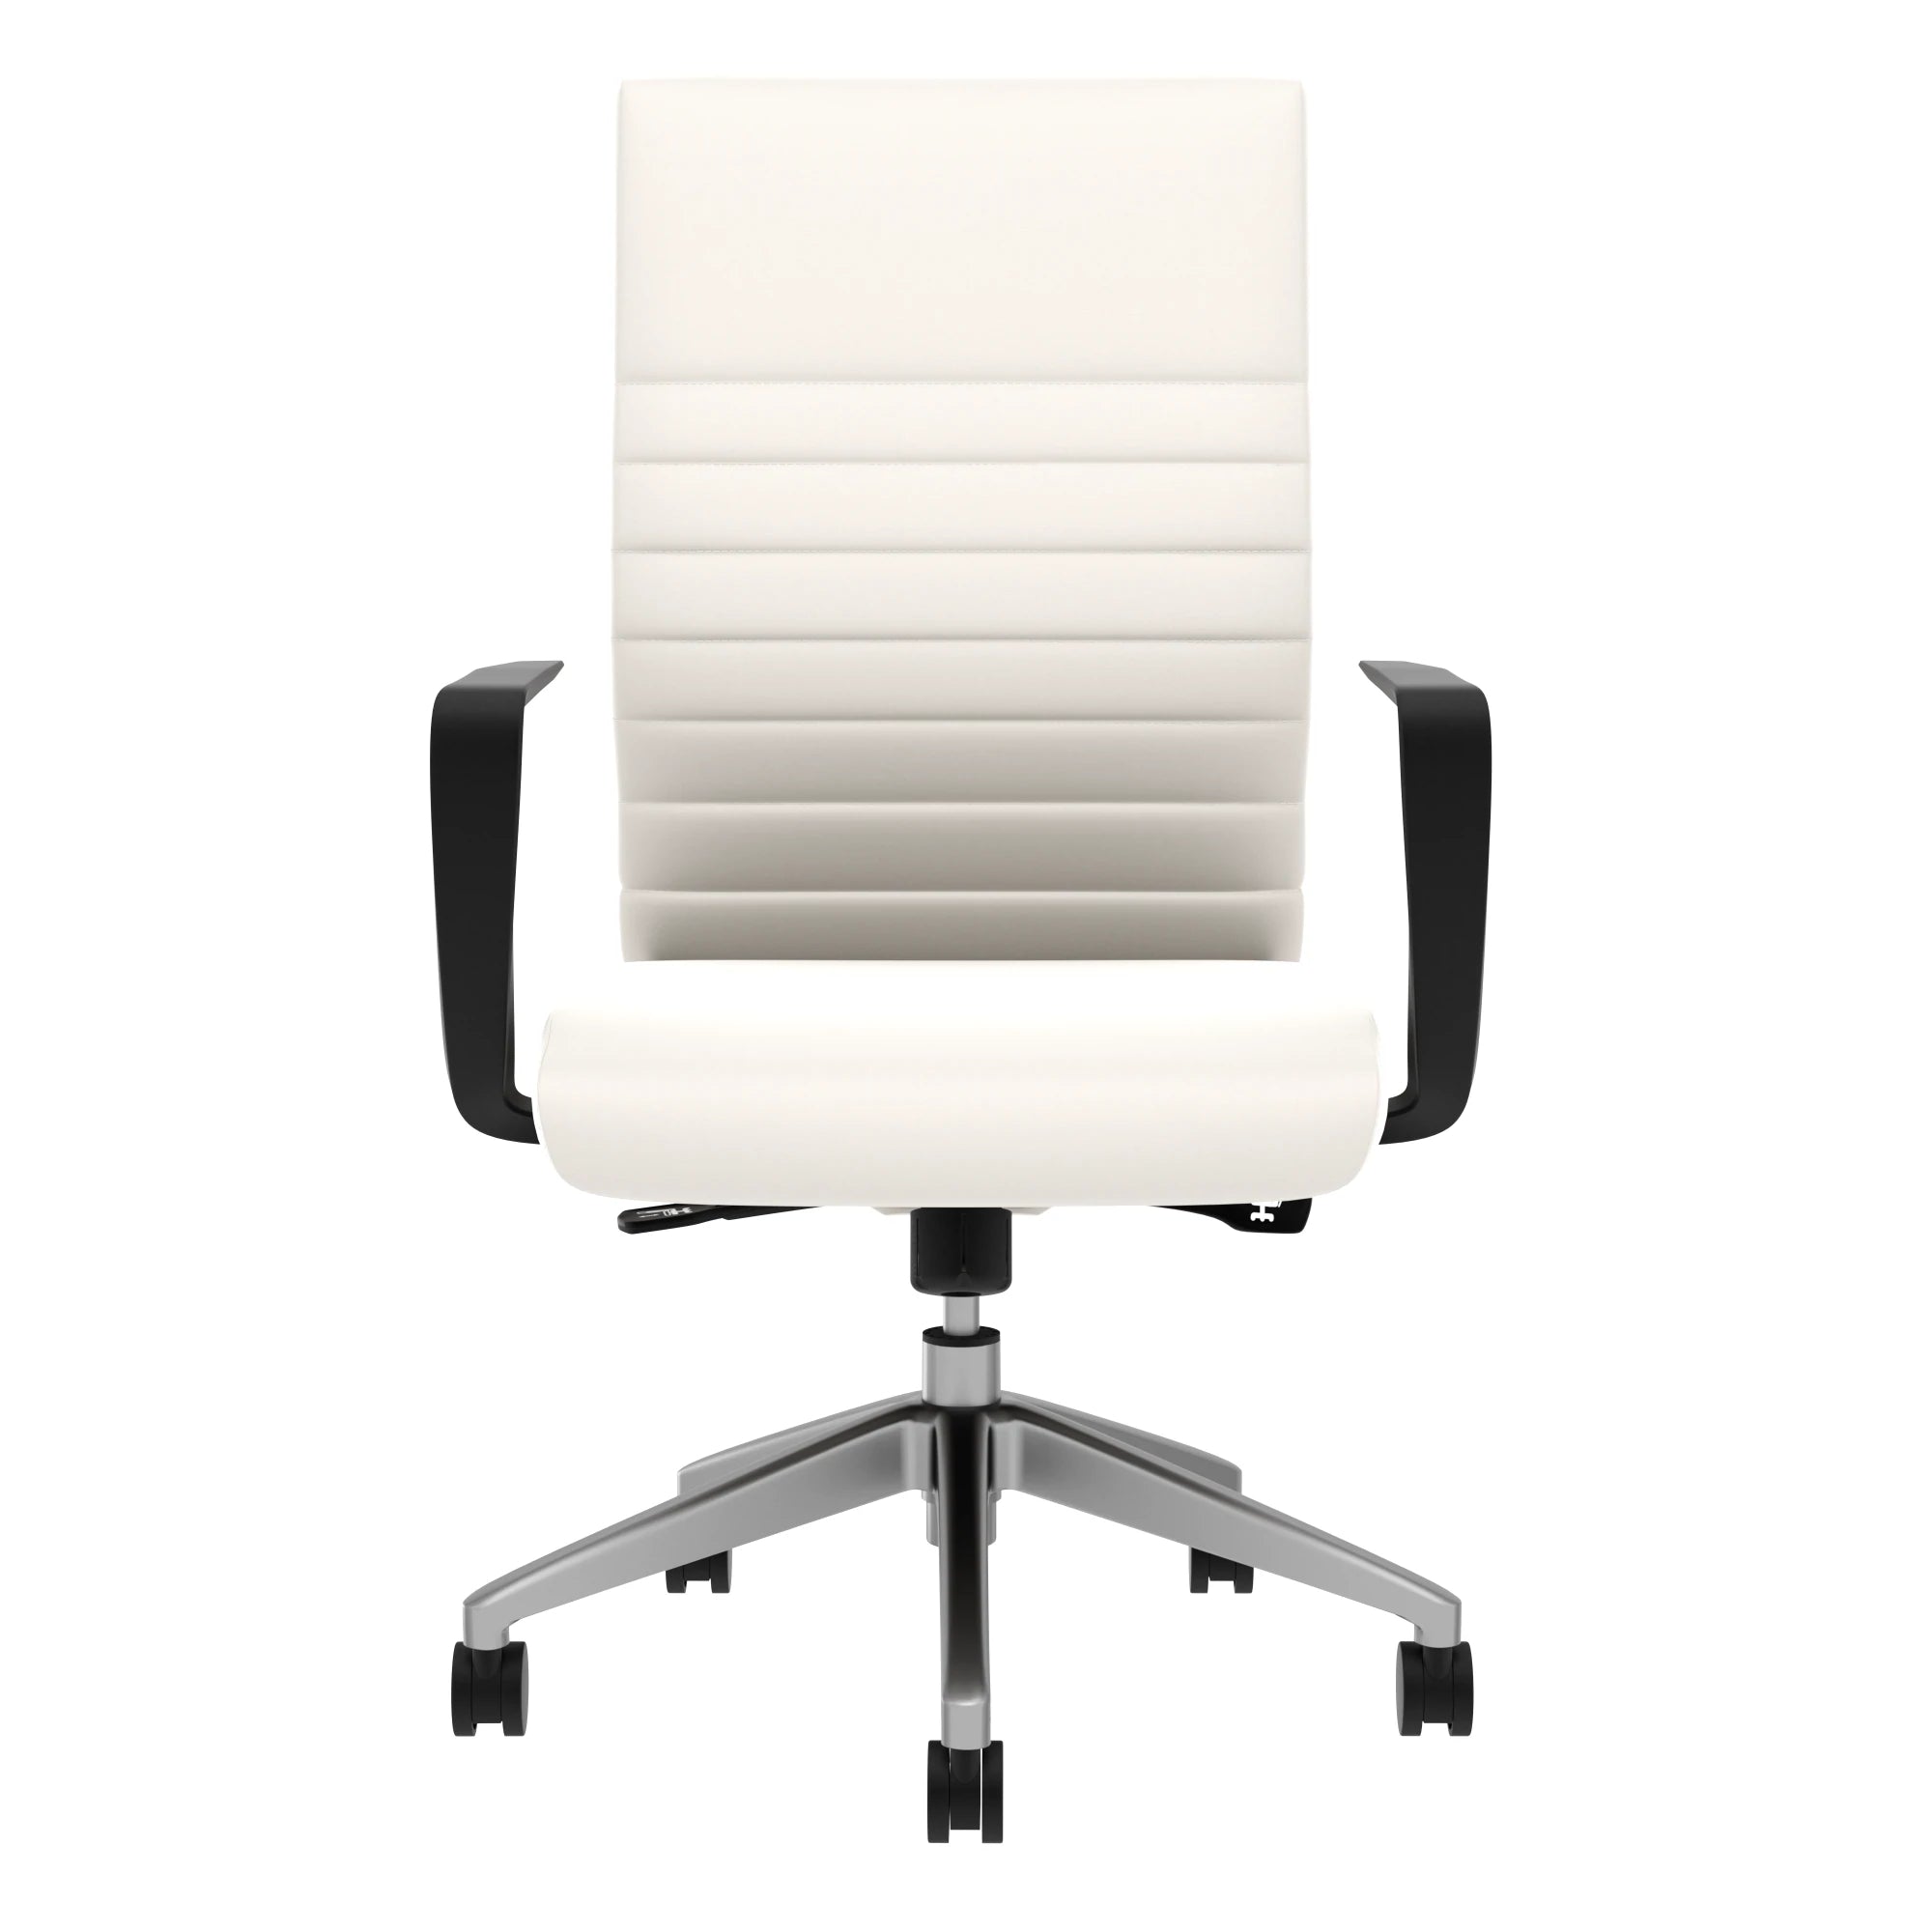 Compel Maxim LT Conference Chair - New